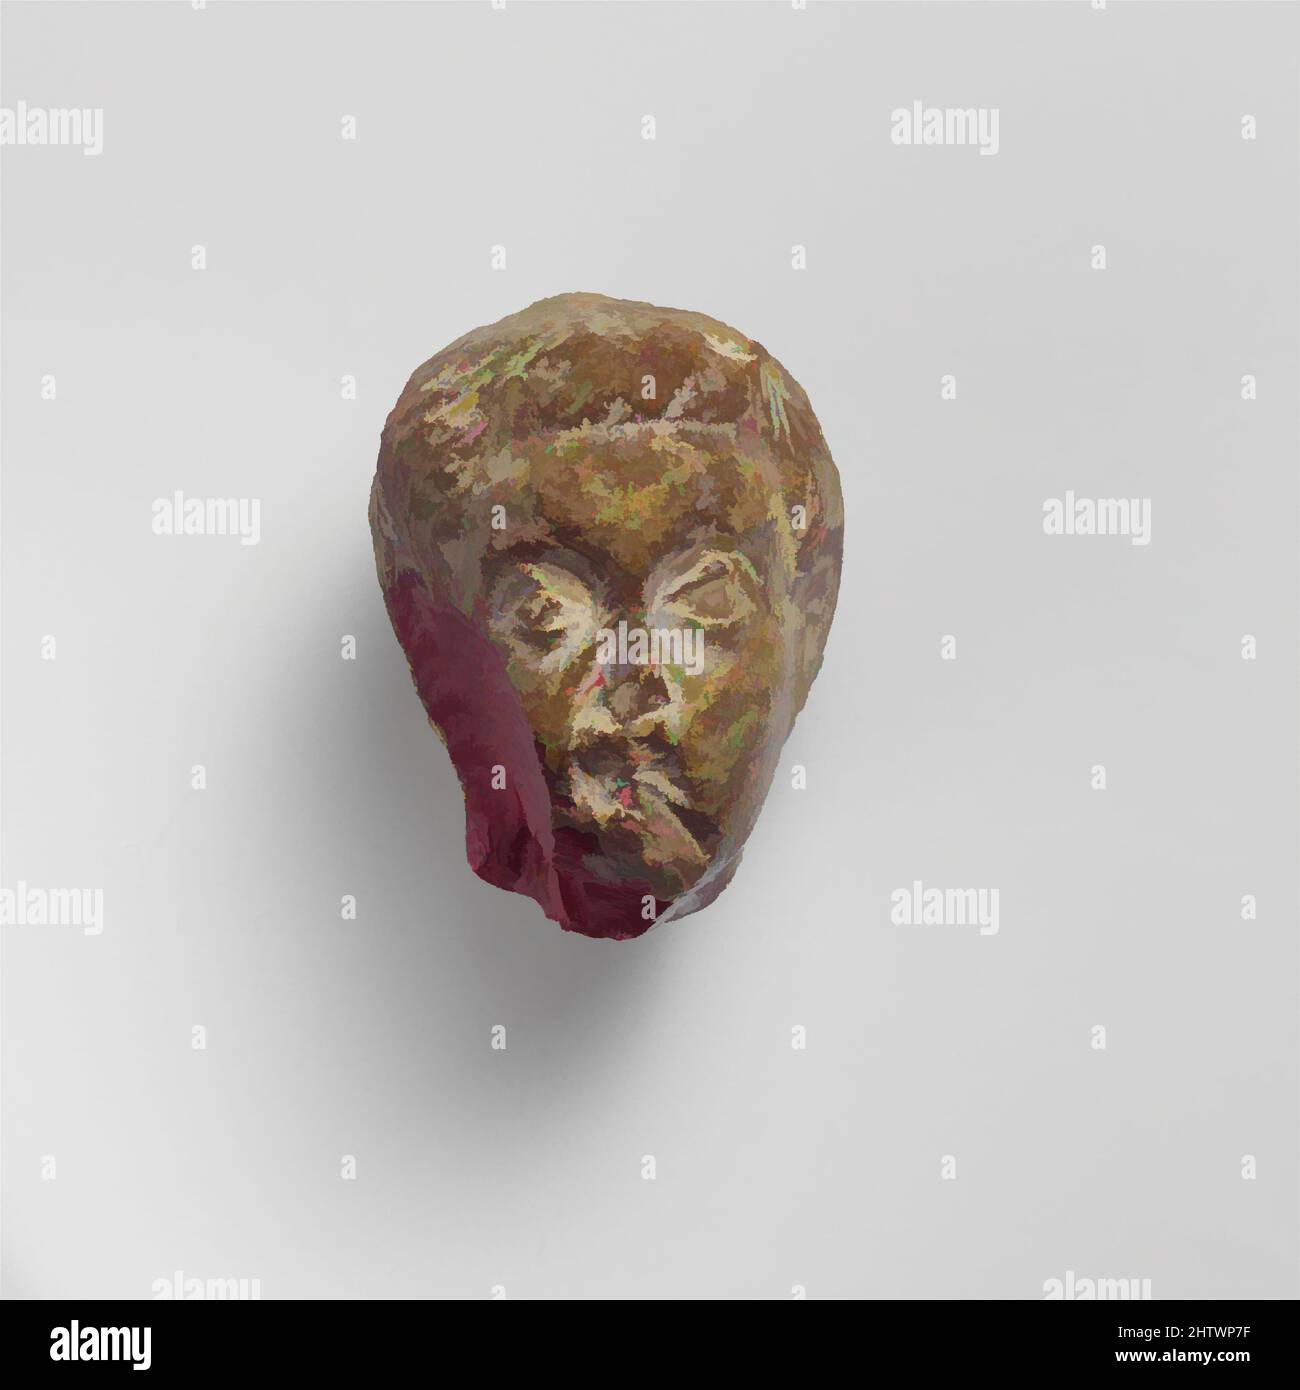 Art inspired by Glass portrait head, Late Imperial, Constantinian, 1st half of 4th century A.D., Roman, Glass; cast and carved, Height: 1 15/16 in. (5 cm), Glass, Opaque deep red., Solid block., Carved in the round: male head with short wavy hair and fringe across forehead, arched, Classic works modernized by Artotop with a splash of modernity. Shapes, color and value, eye-catching visual impact on art. Emotions through freedom of artworks in a contemporary way. A timeless message pursuing a wildly creative new direction. Artists turning to the digital medium and creating the Artotop NFT Stock Photo